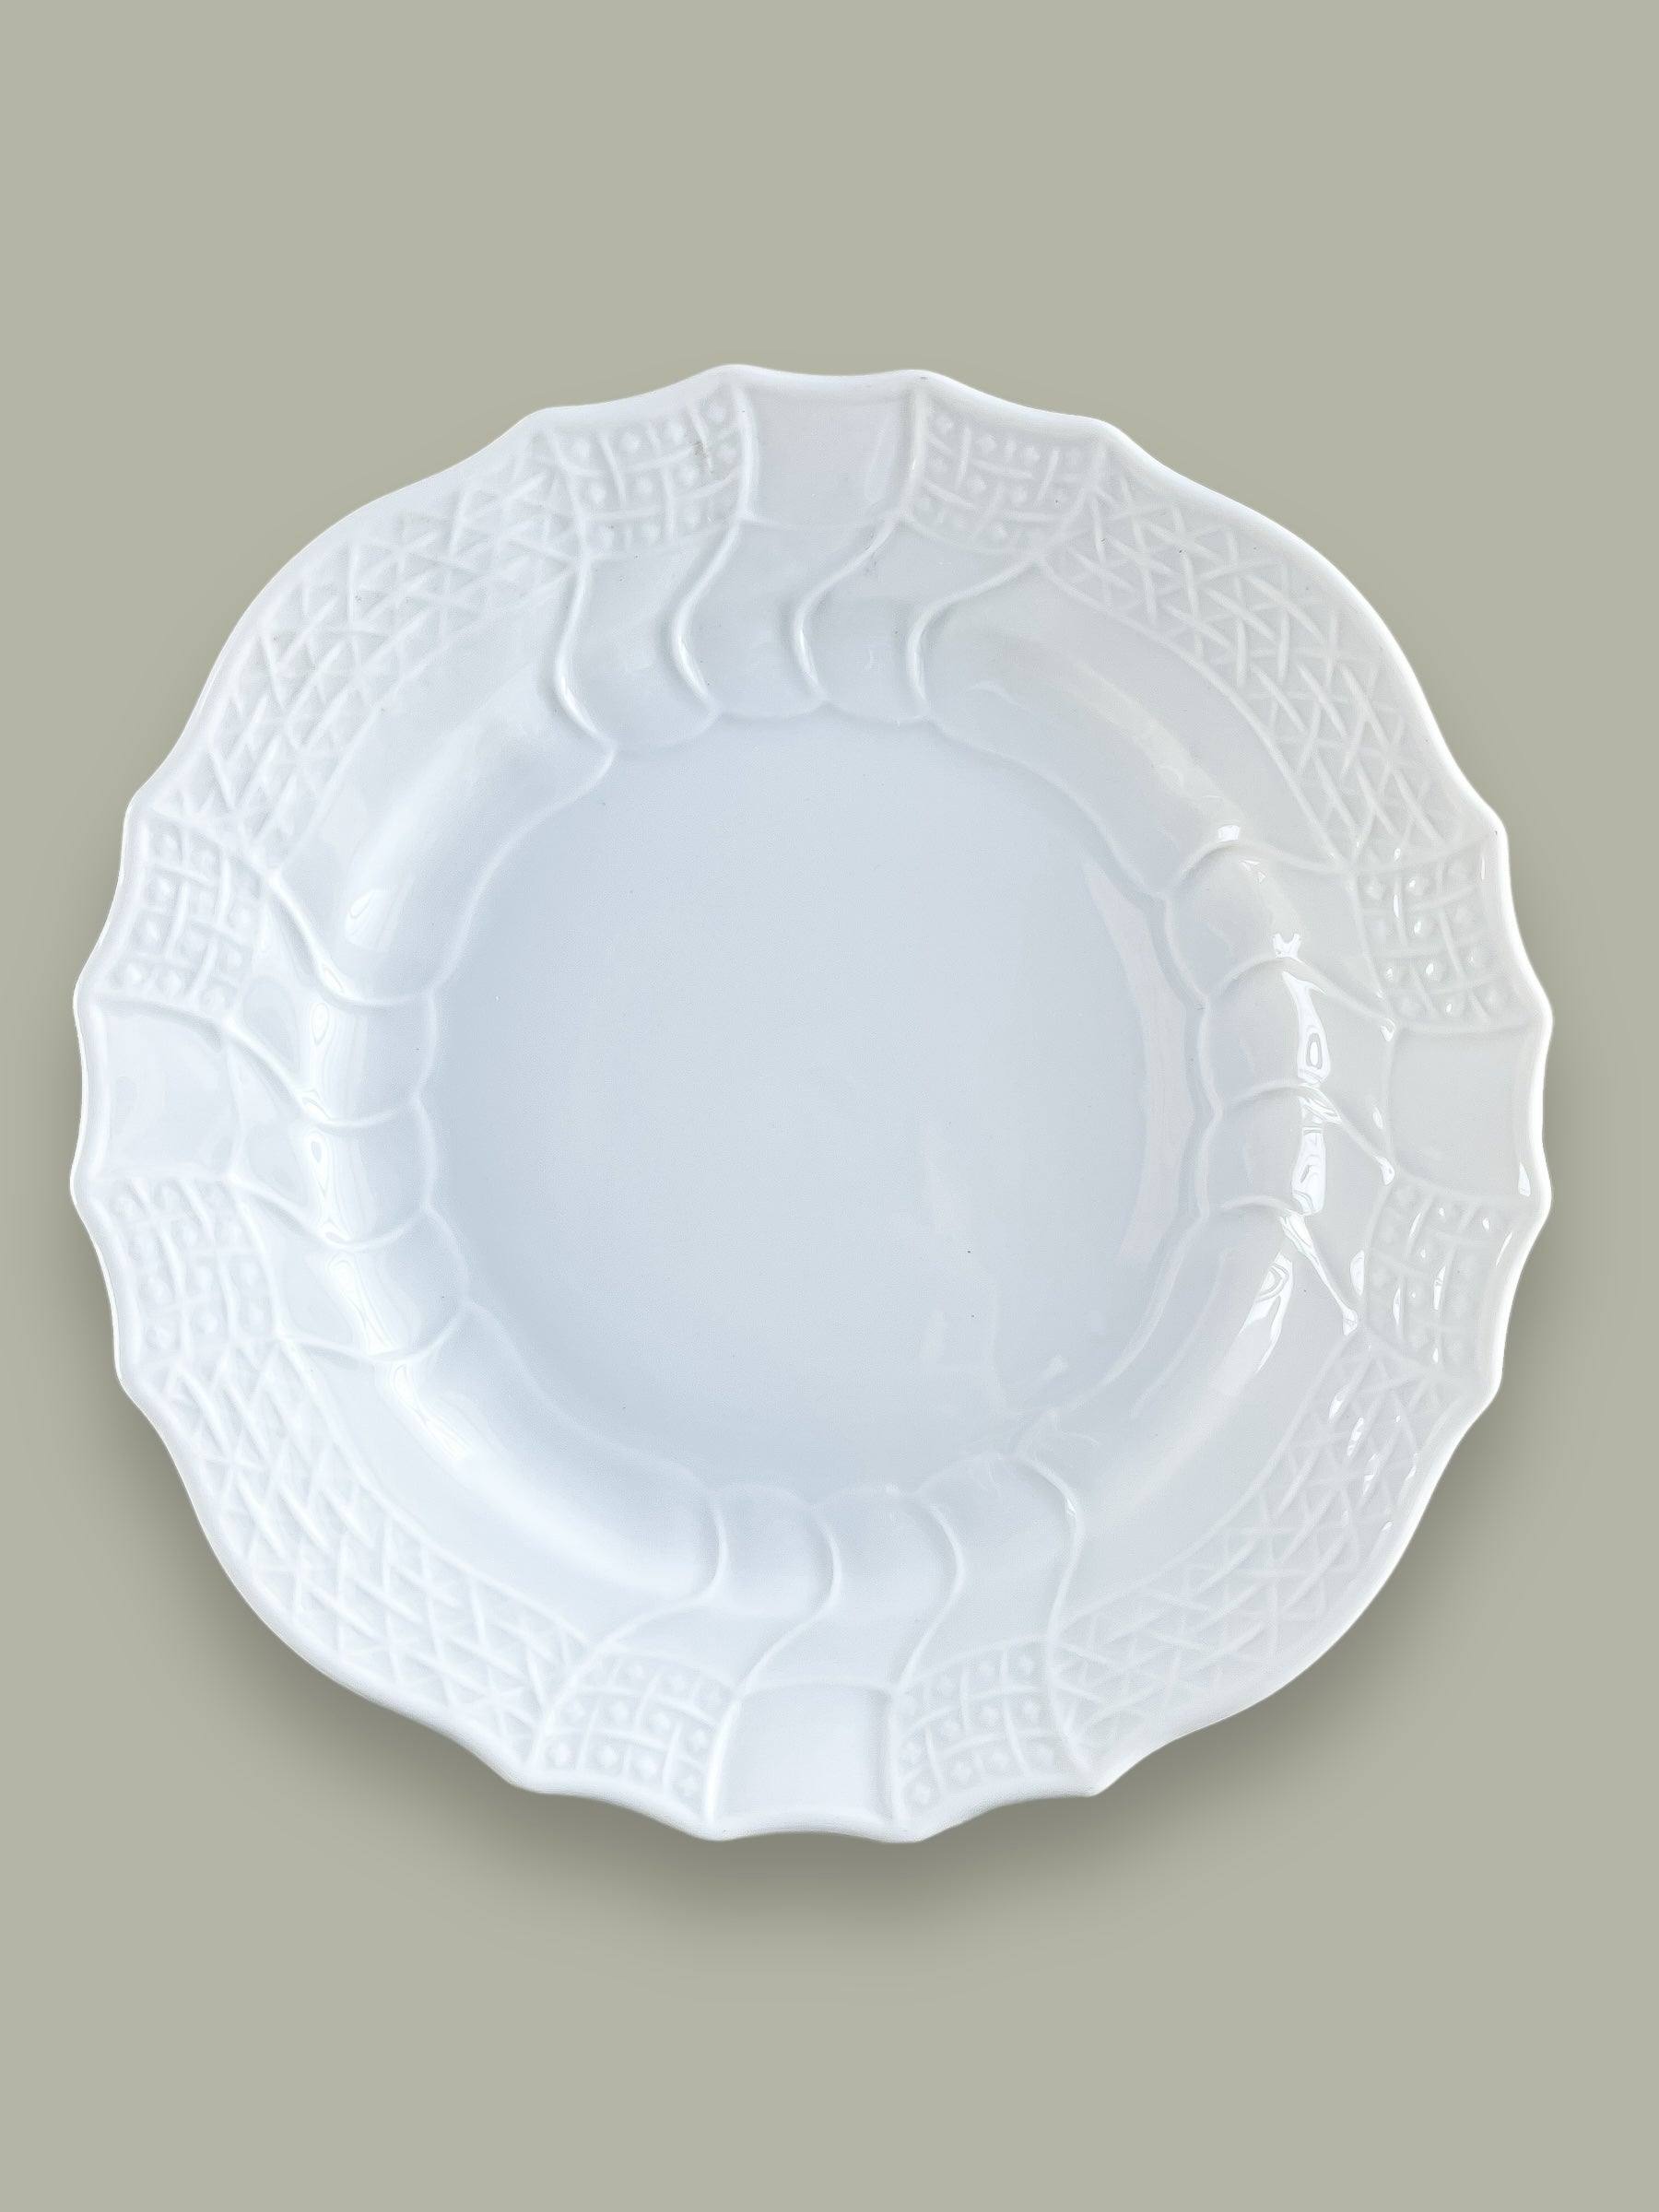 Hutschenreuther Dessert Plate Set of 6 - 'Dresden' Collection in White - SOSC Home